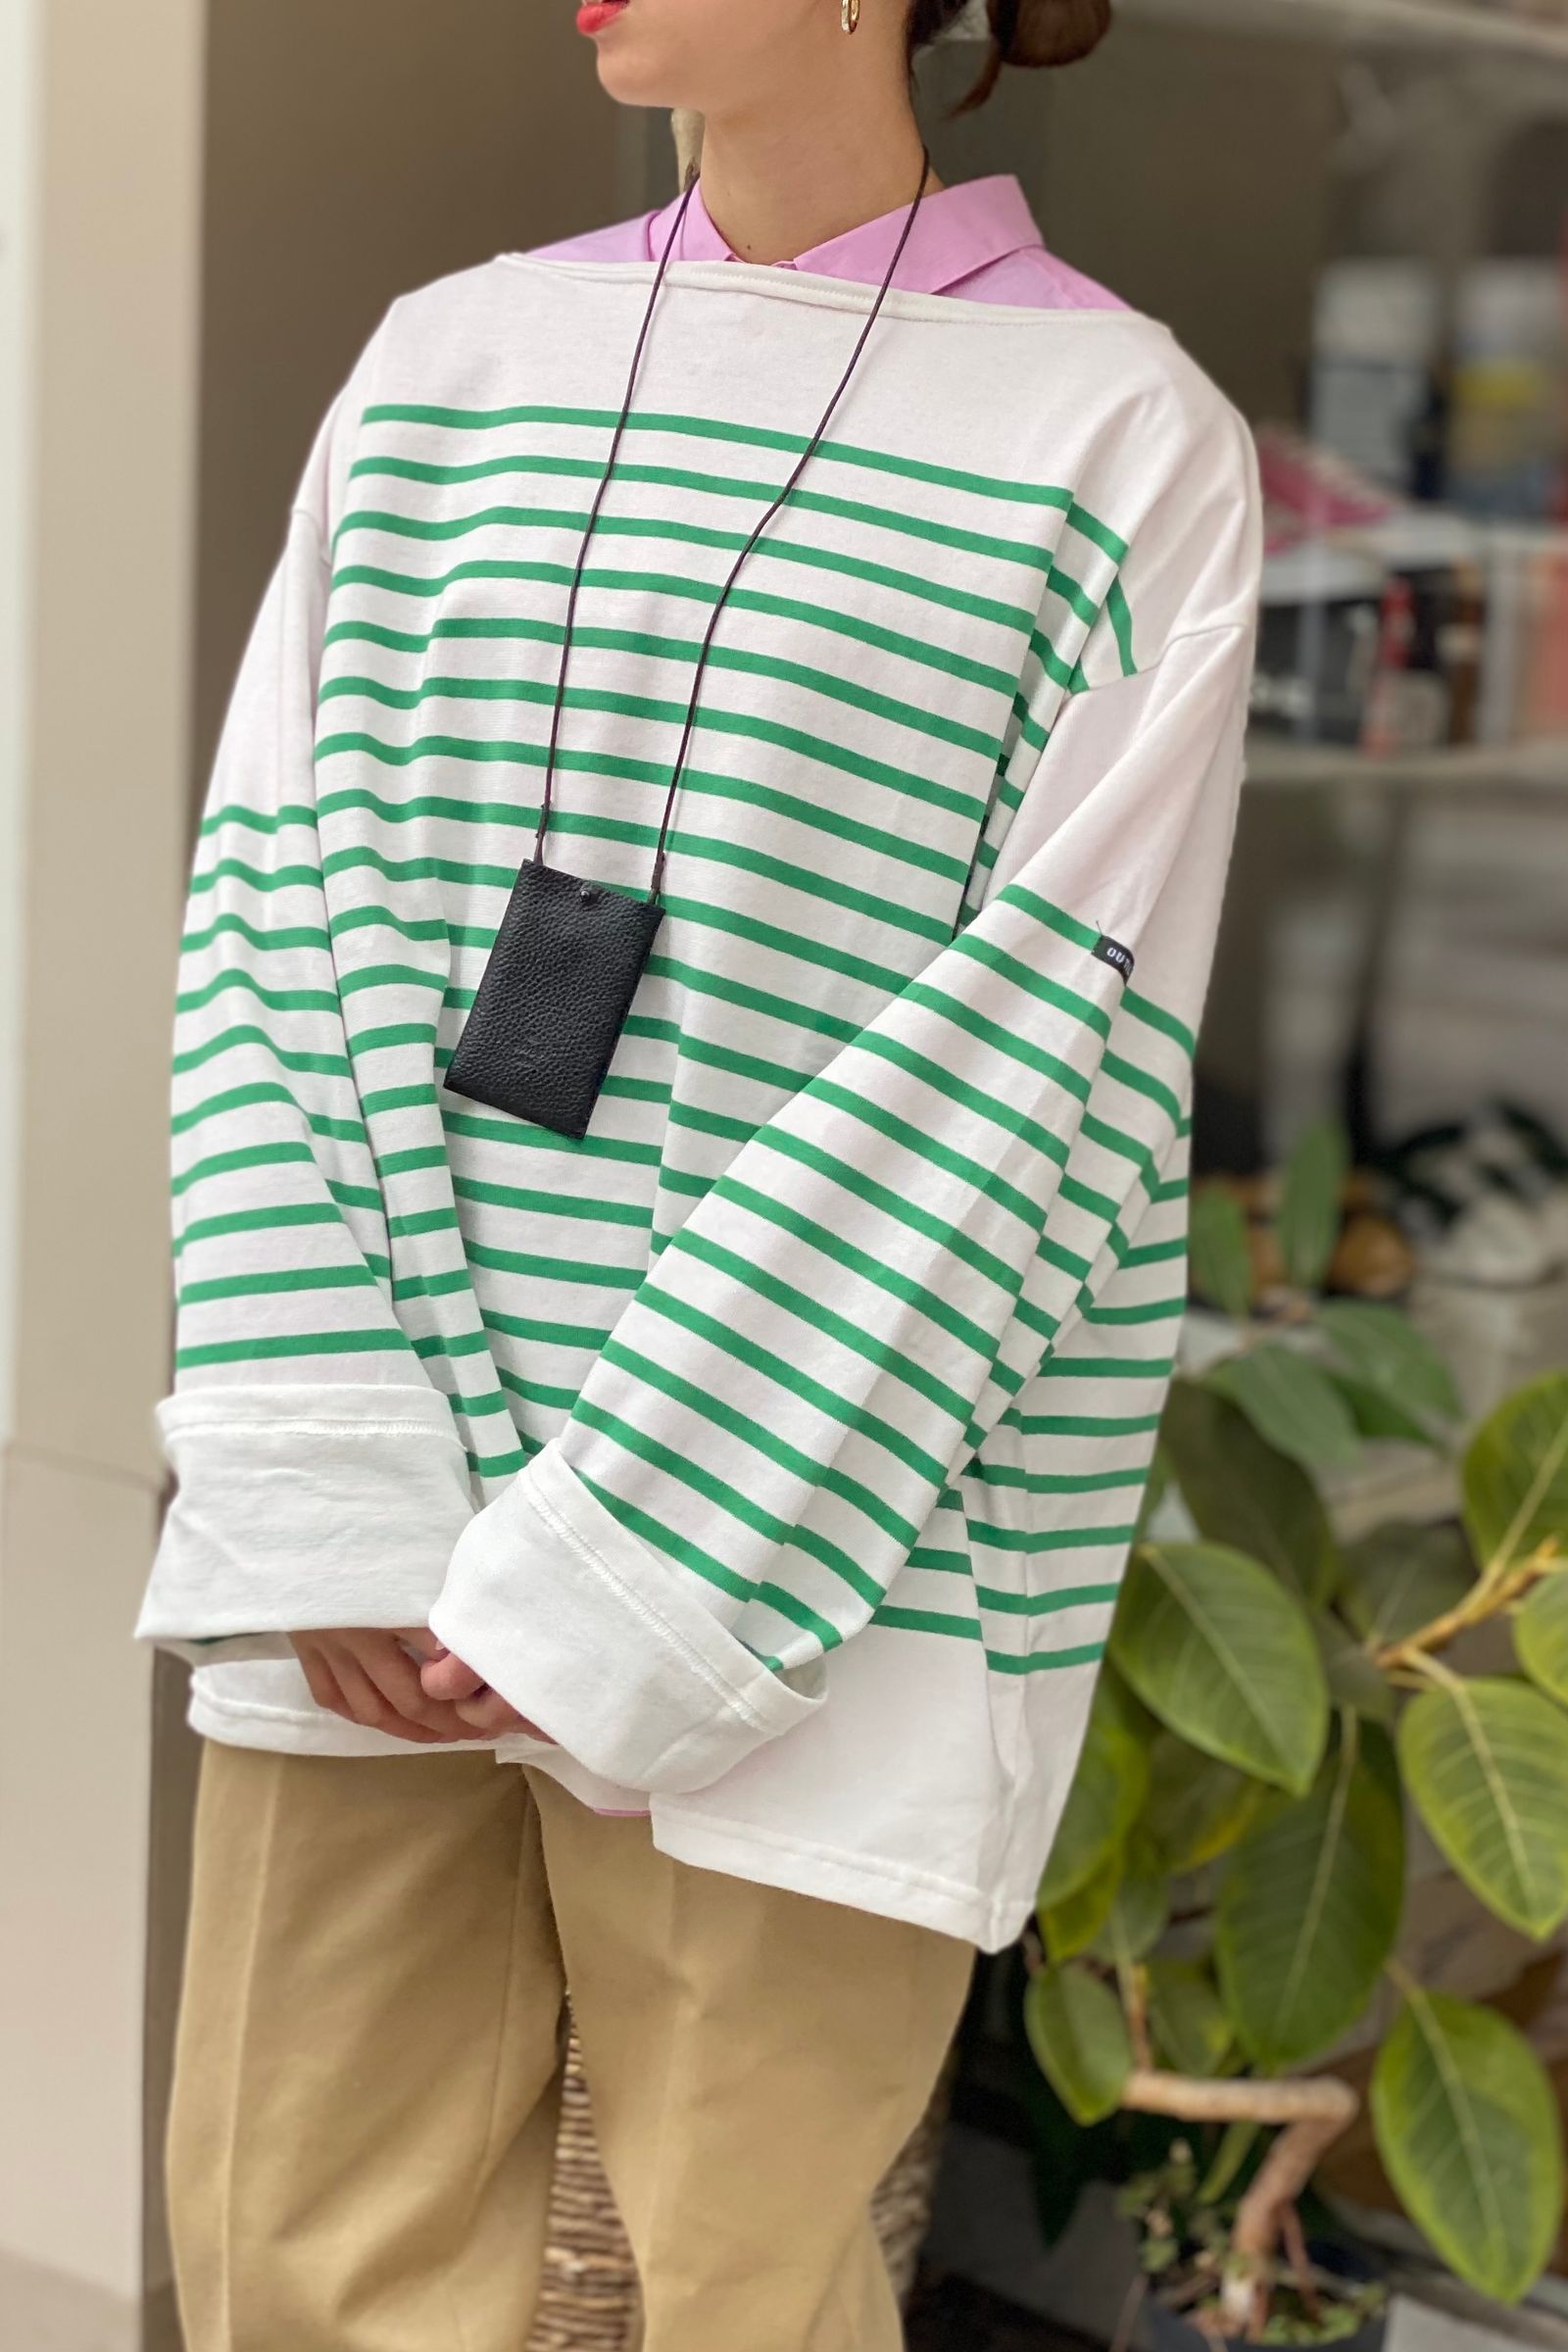 OUTIL - バスクシャツ/tricot aast -off/green briar- 23ss unisex | asterisk